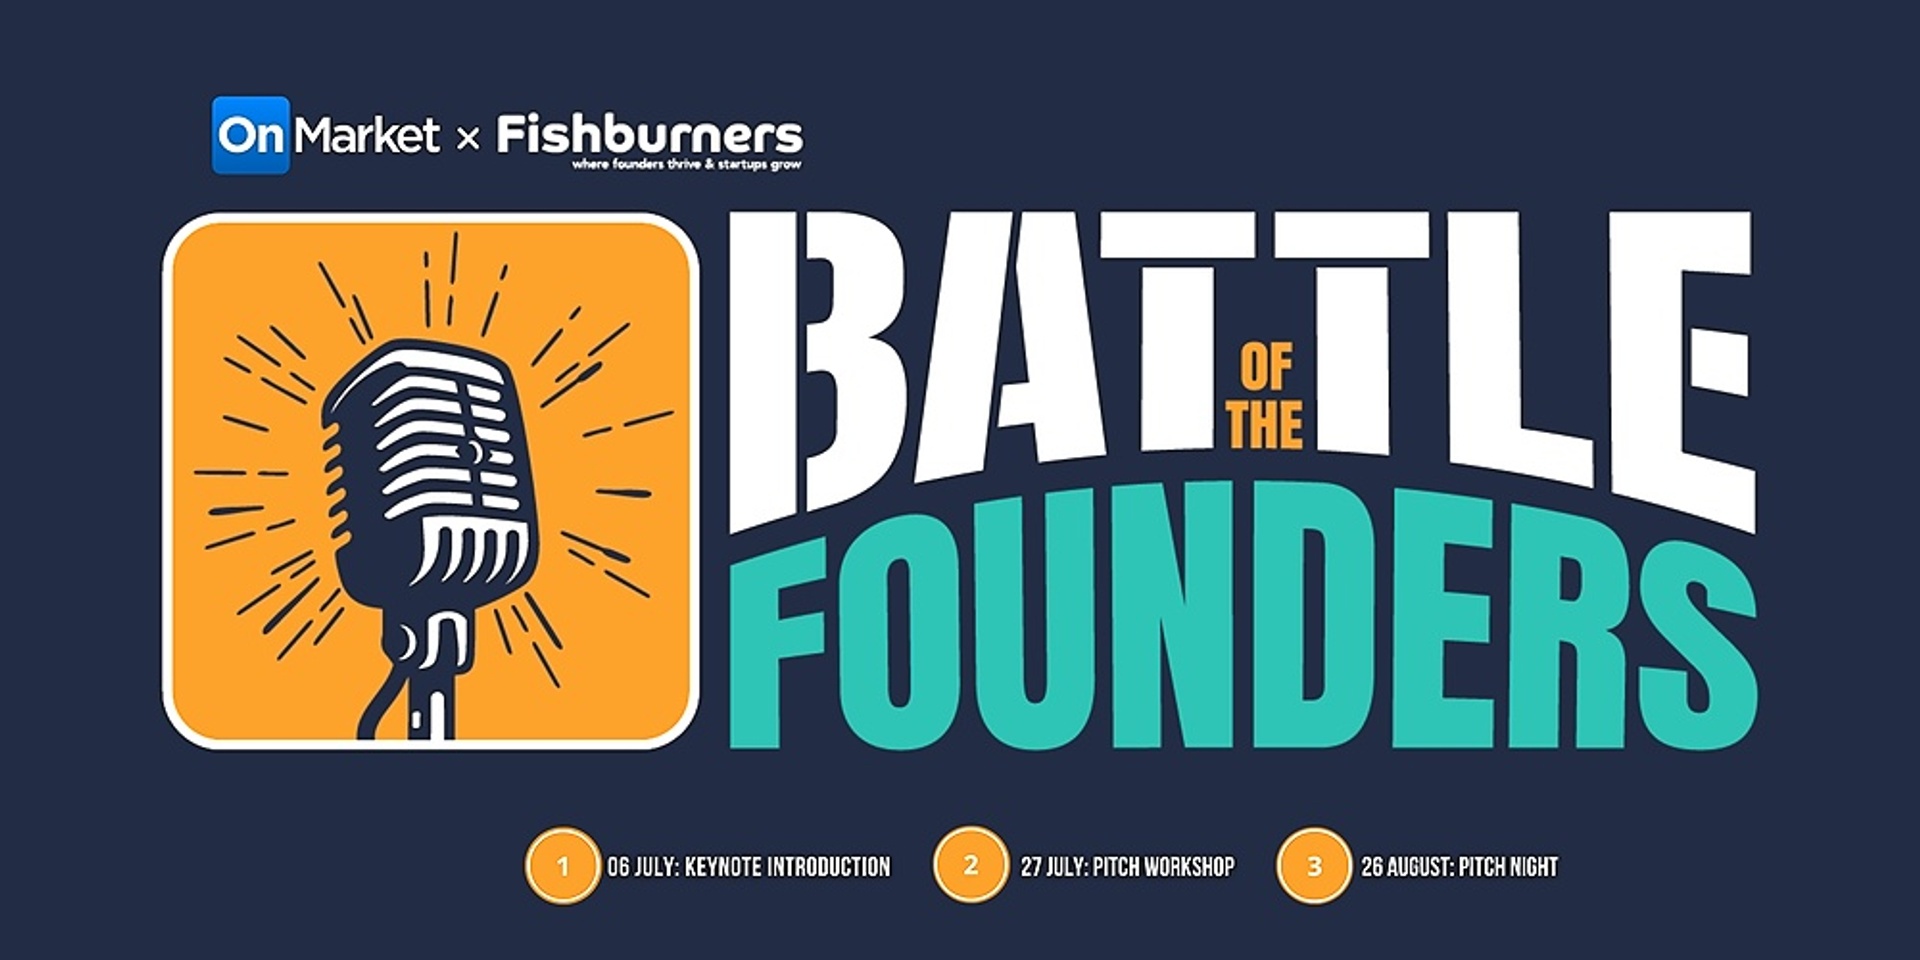 Battle of the Founders Pitch Night with OnMarket